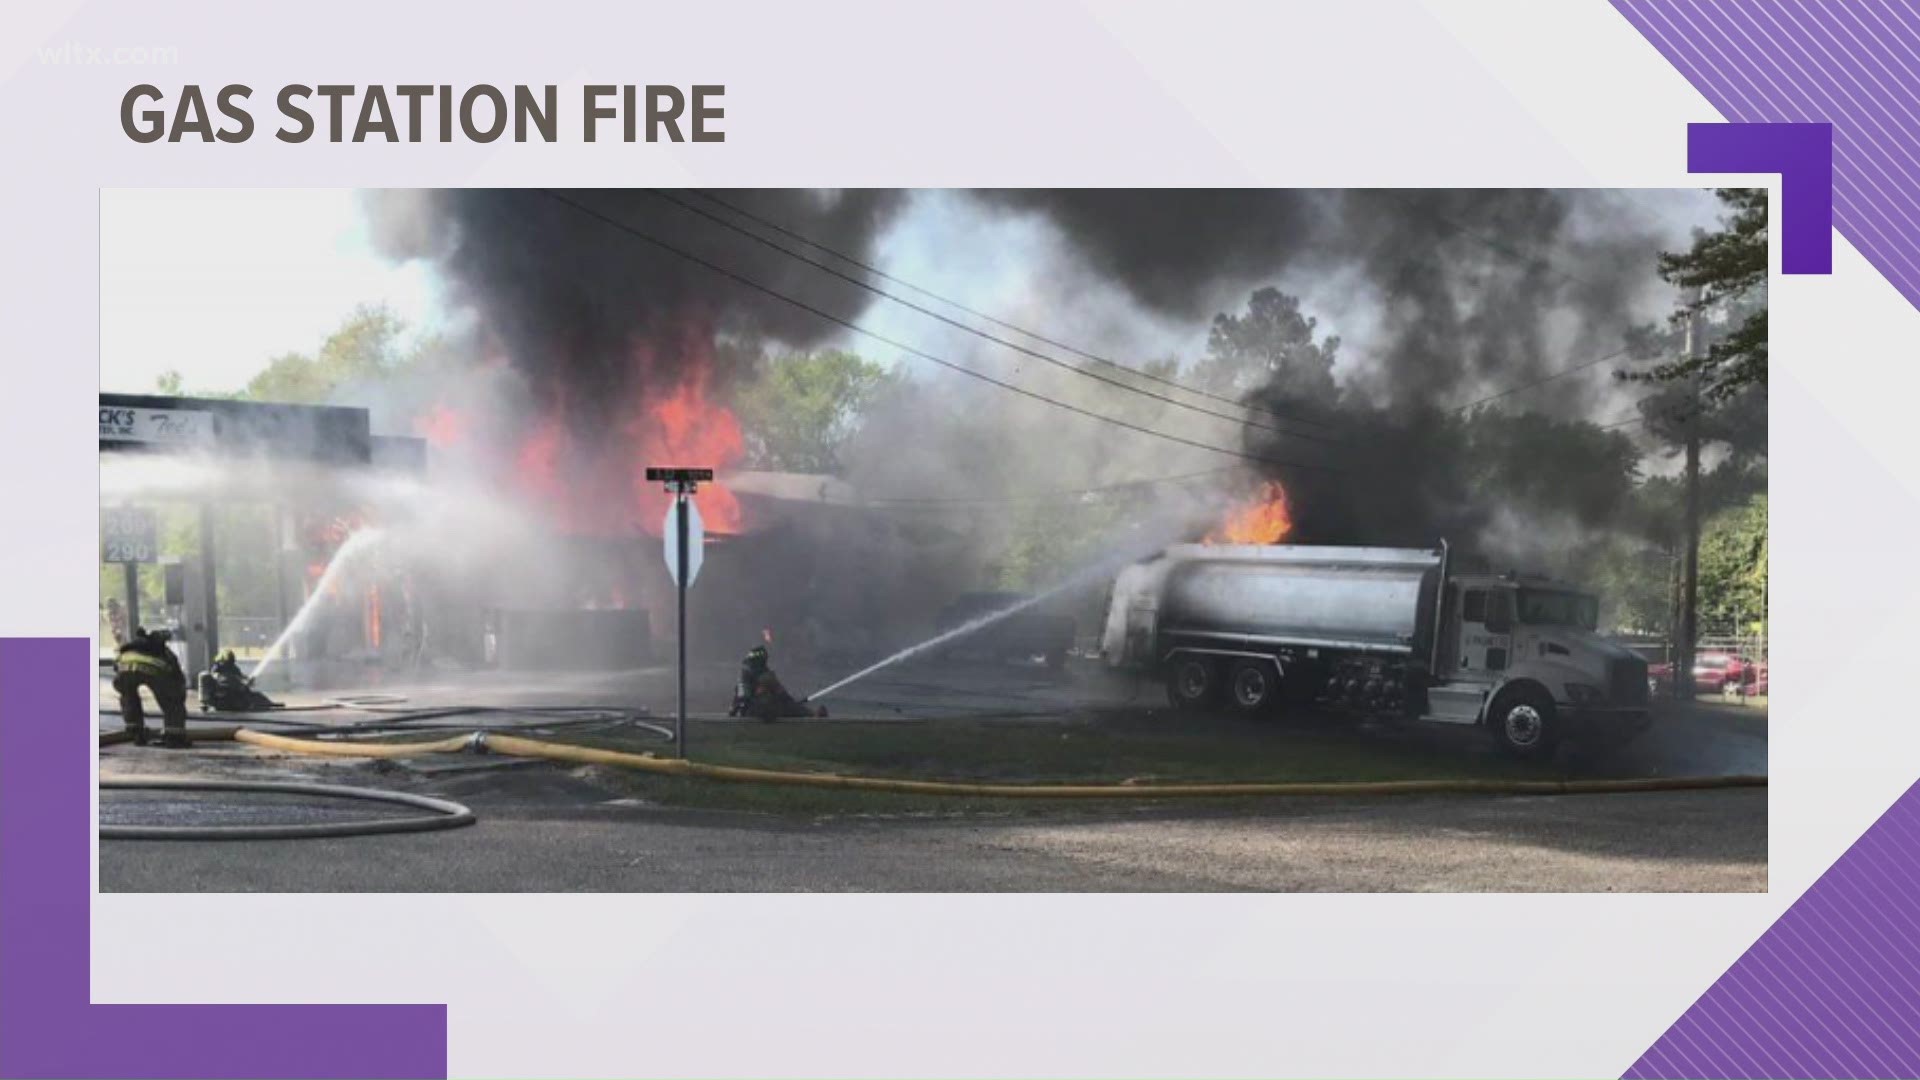 A spark triggered a fire at a South Carolina gas station destroying the station, the tanker, and four cars.